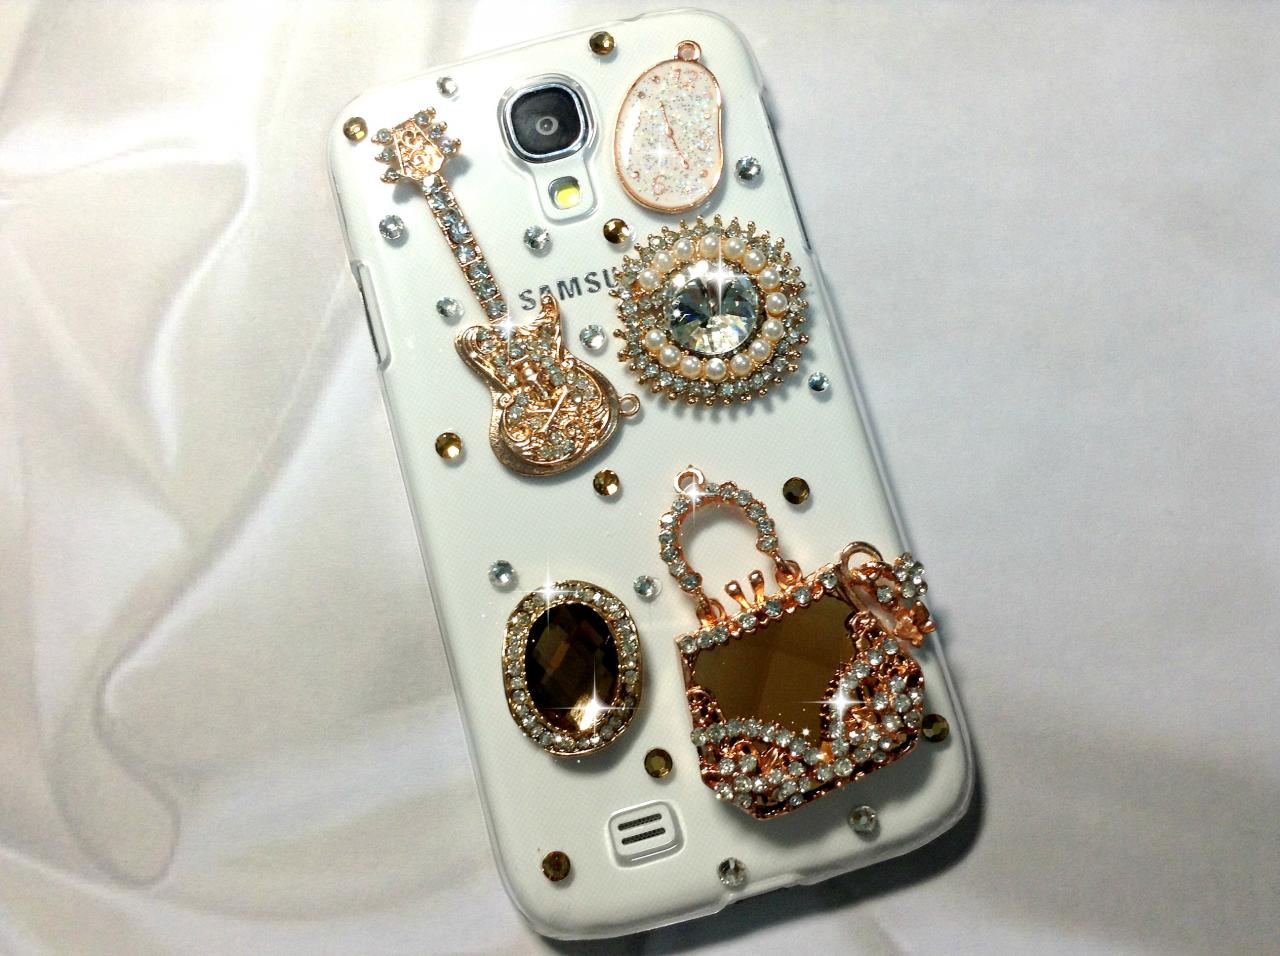 3d Handmade Luxury Crystal Design Case Cover For Samsung Galaxy S 4 S4 Iv Lte I9500 I9505